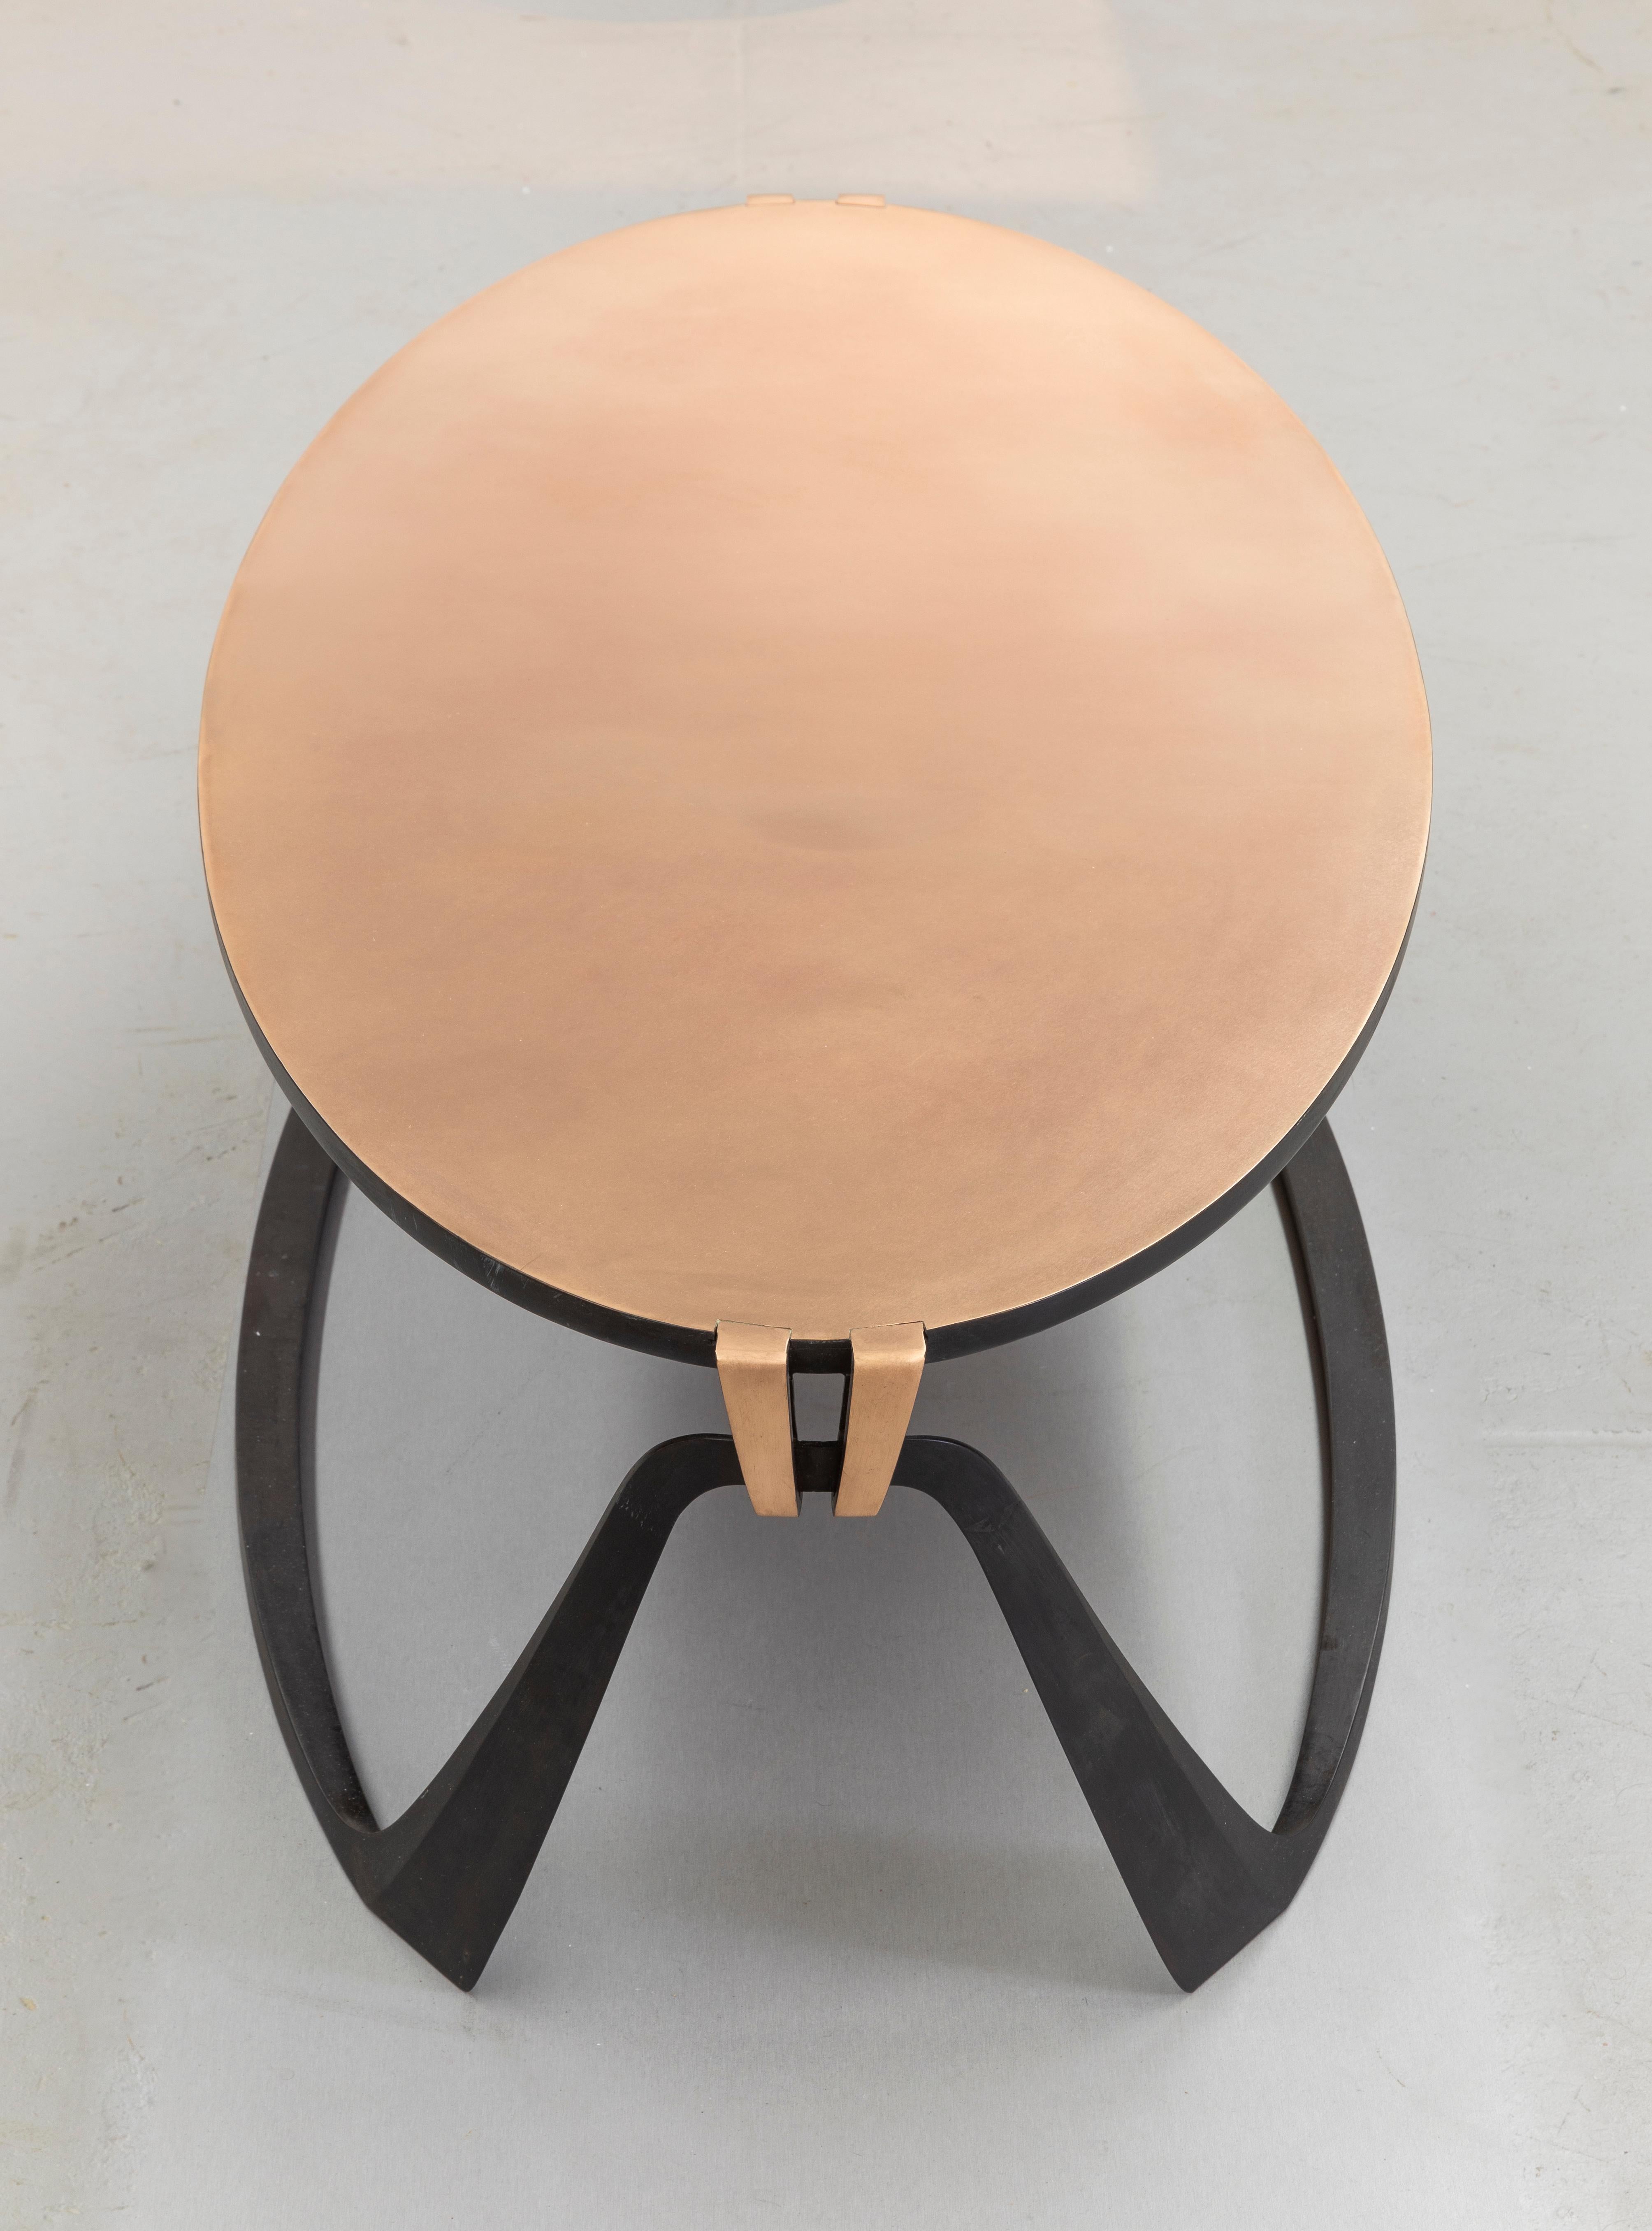 Elegant 2-tone bronze coffee table.
Influenced by her studies in fashion design Anasthasia Millot creates subtly dynamic shapes that seem to defy the static of solid Material.
The curves, upstrokes and down strokes of this piece are a feat as if